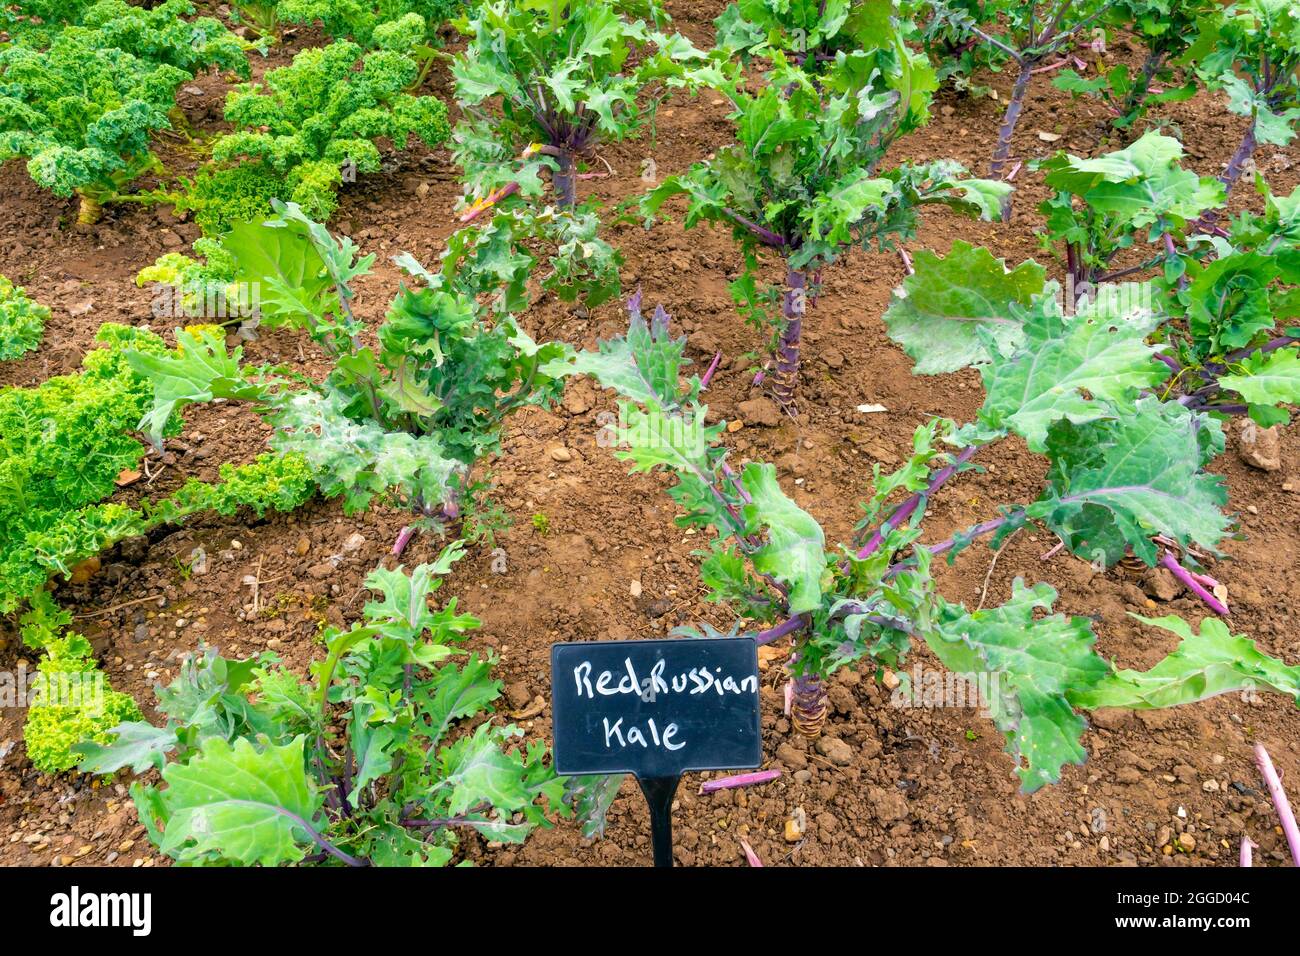 Red Russian Kale growing in the Edible Garden at the Walled Rose Garden Wynyard Hall Tees Valley England UK Stock Photo